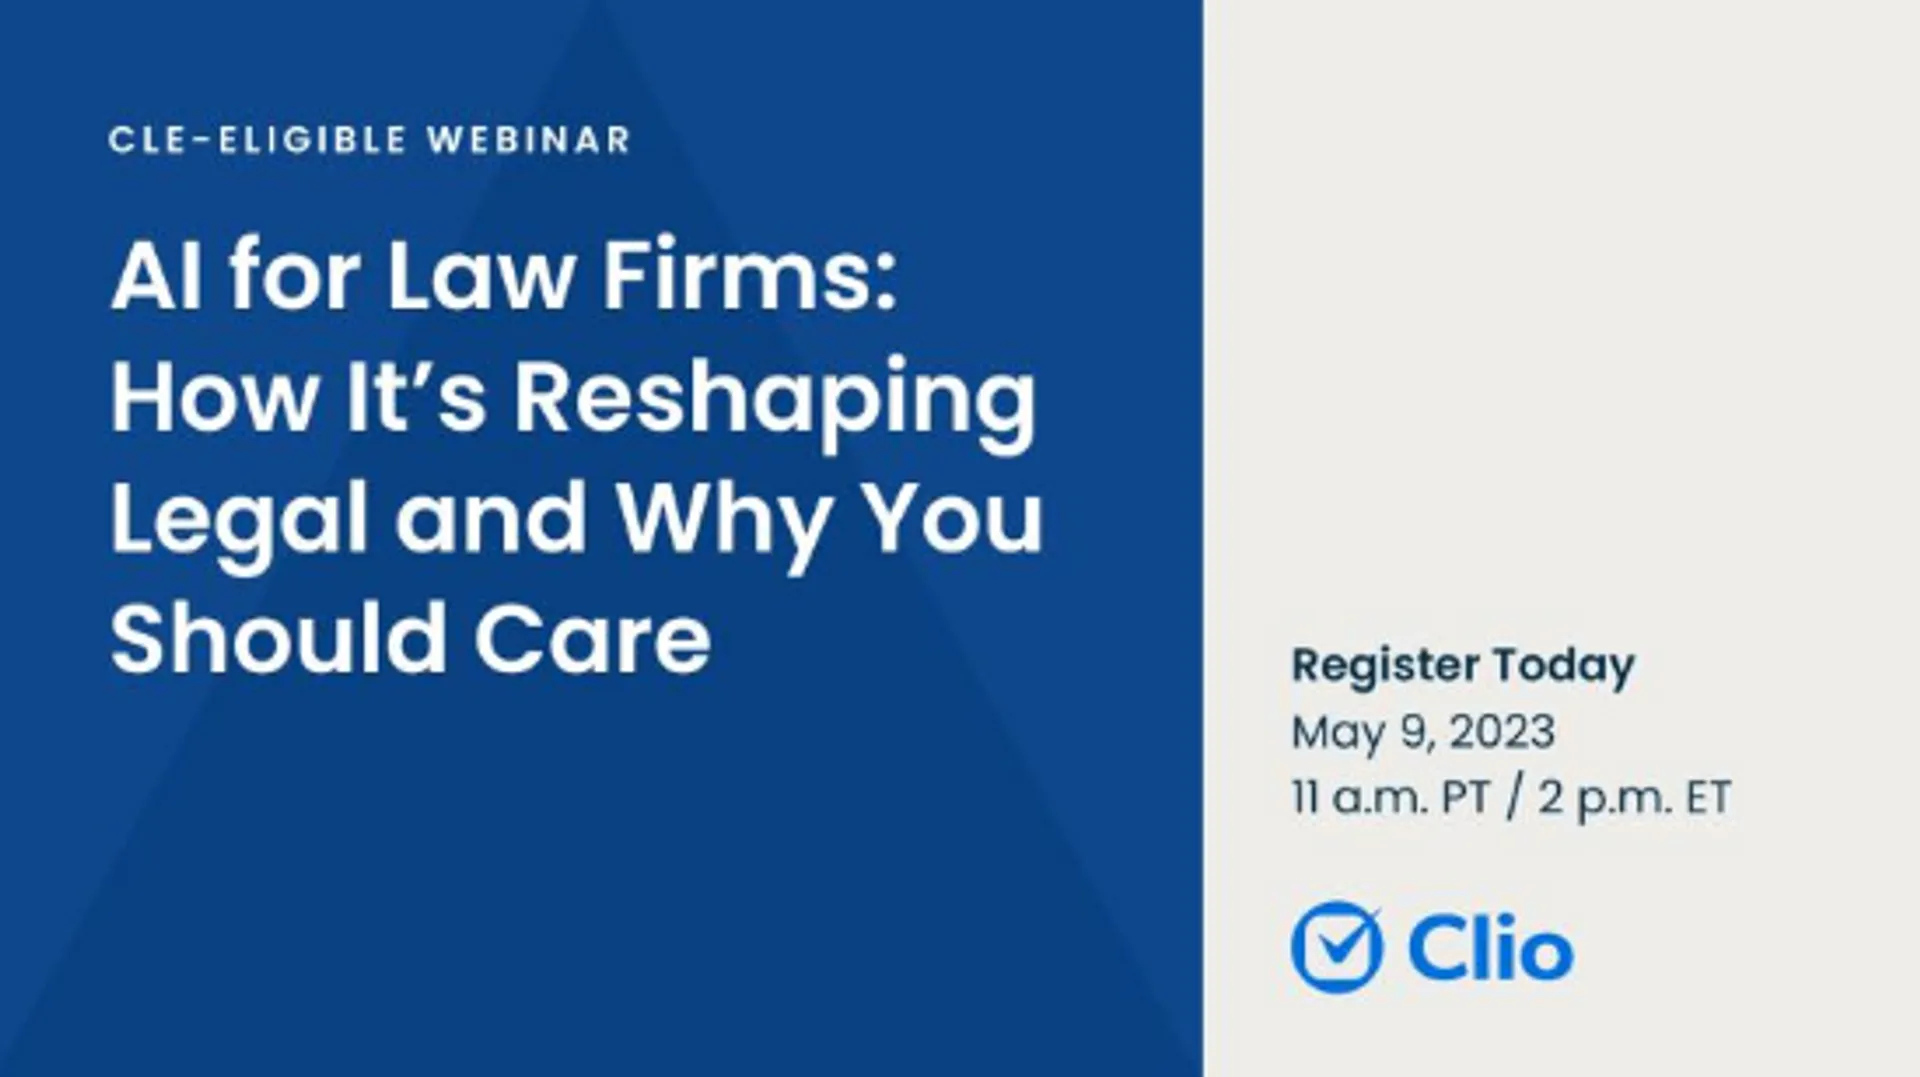 If you're a lawyer or active in the legal industry, then you're going to want to make sure to attend this Clio - Cloud-Based Legal Technology #AI event next Tuesday!  https://bit.ly/3nig4SC